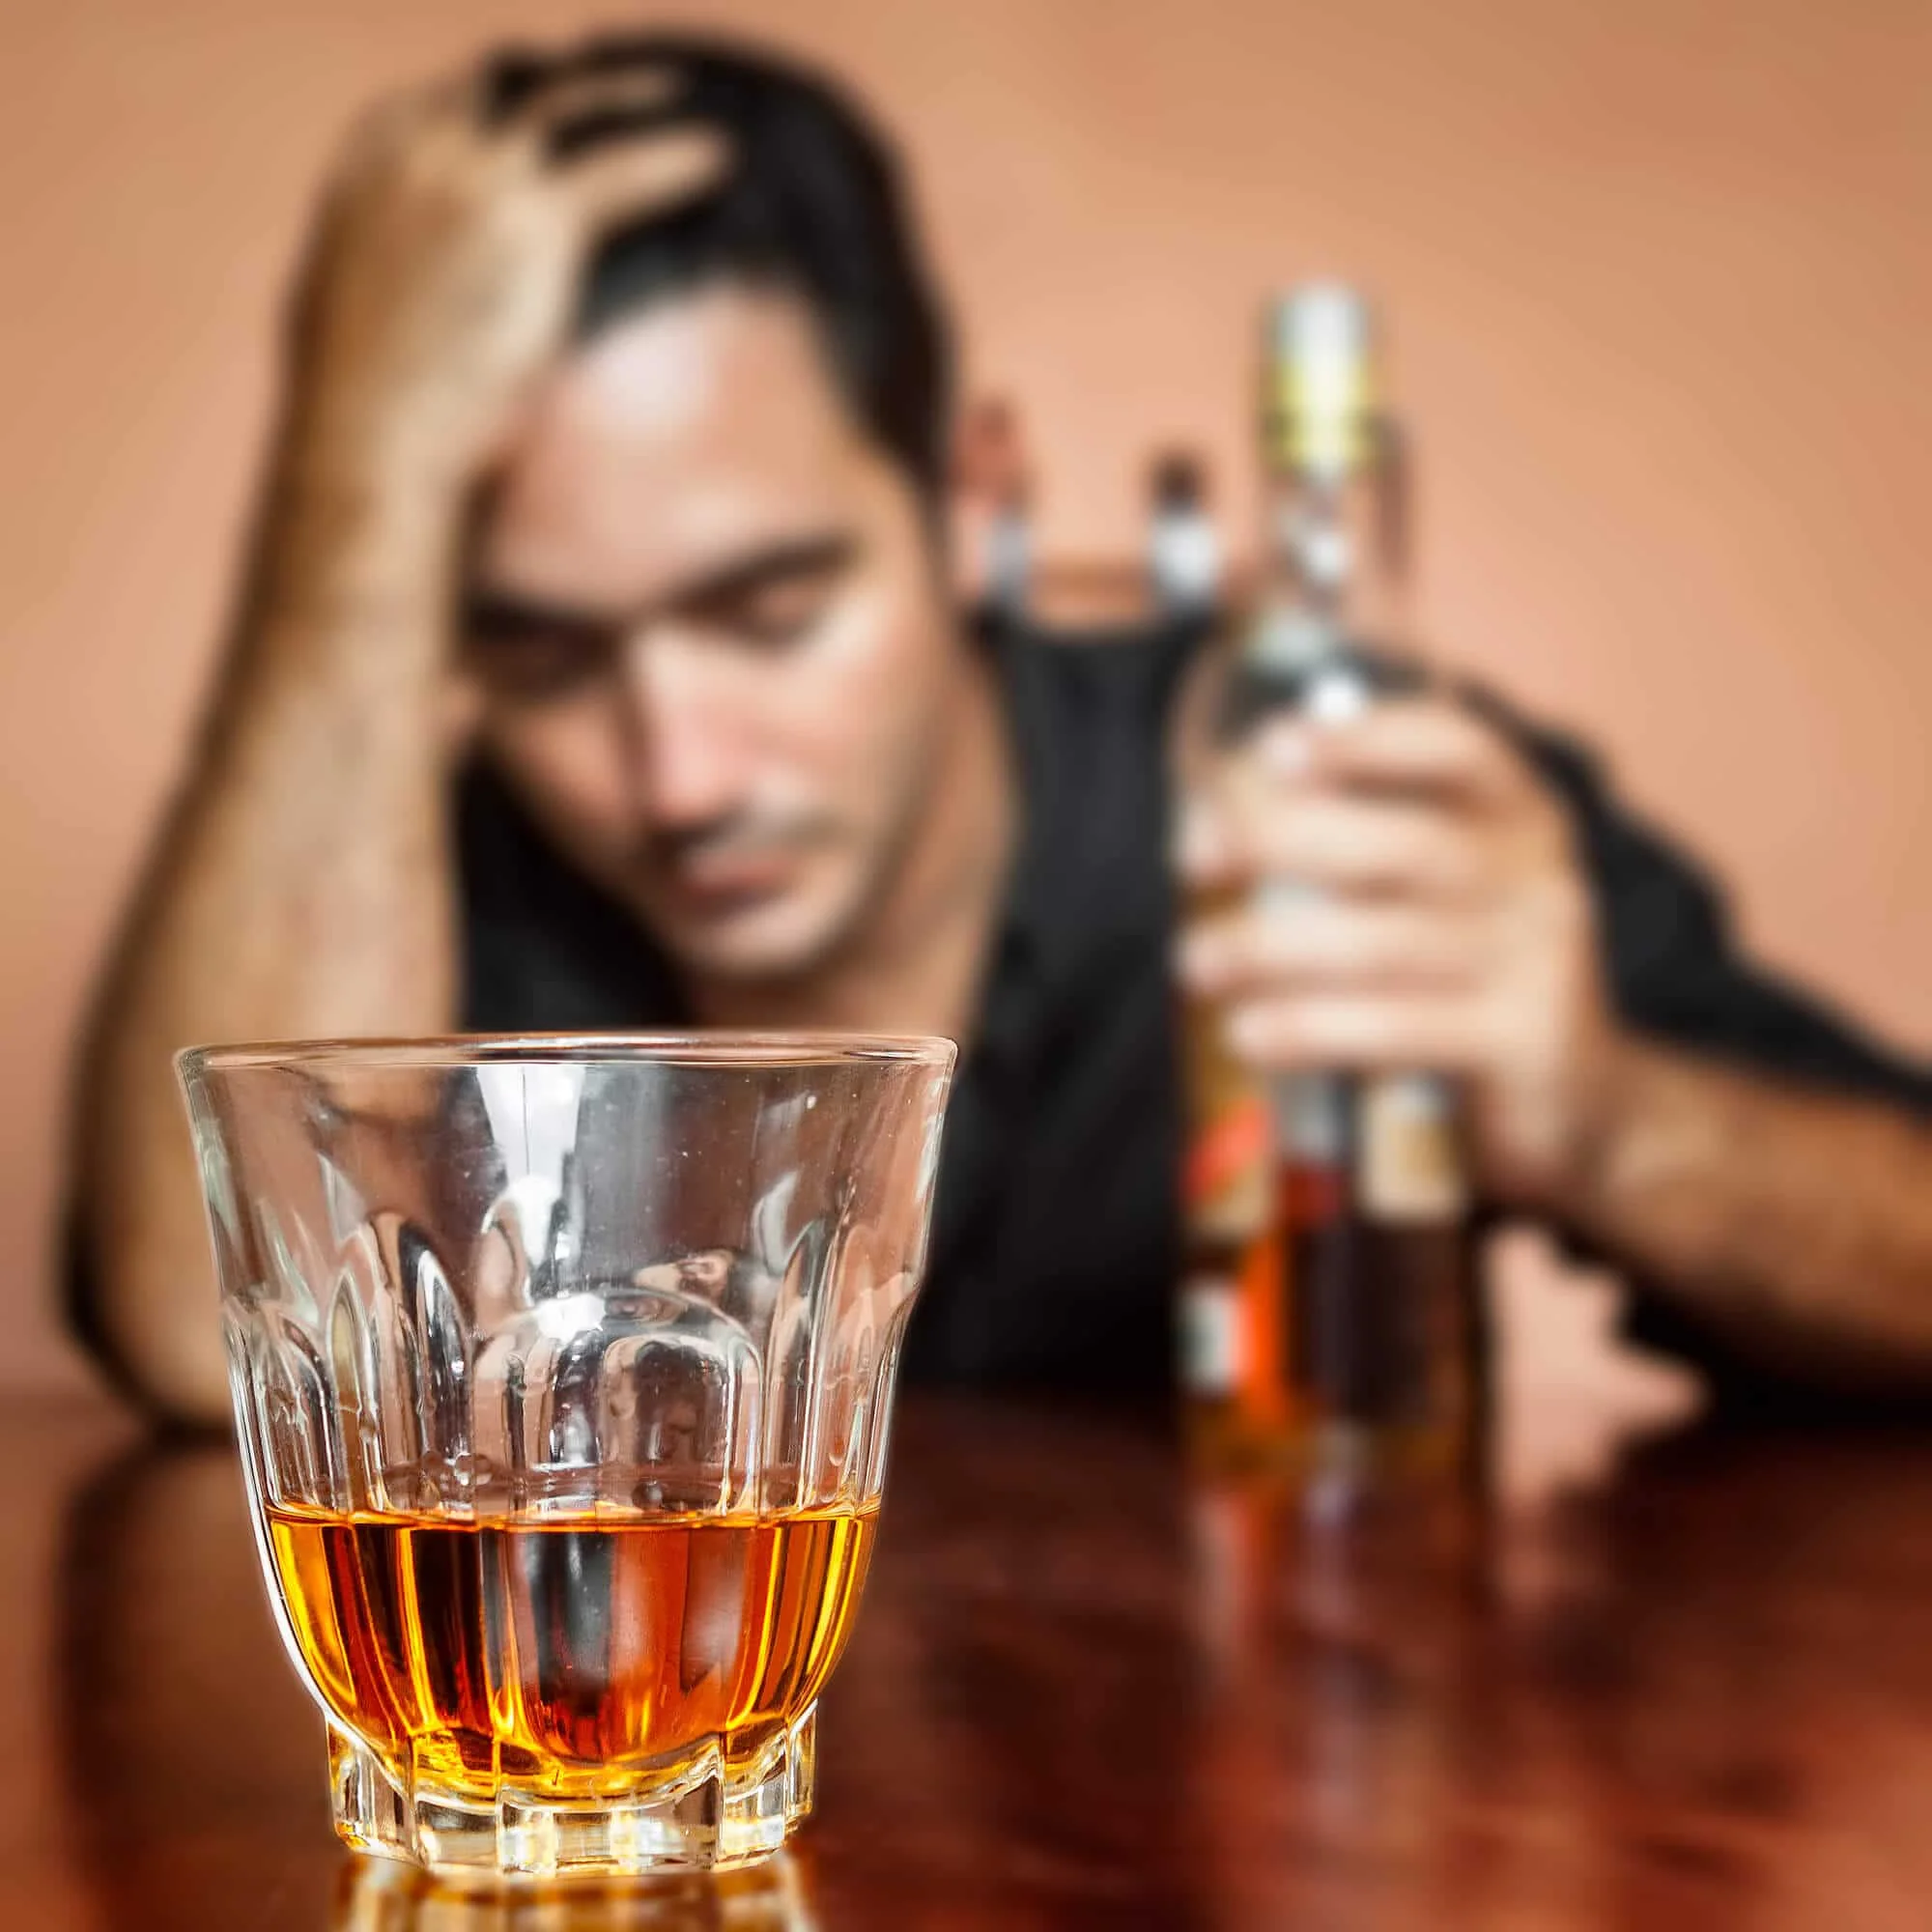 Where to recover at alcohol rehab south florida?